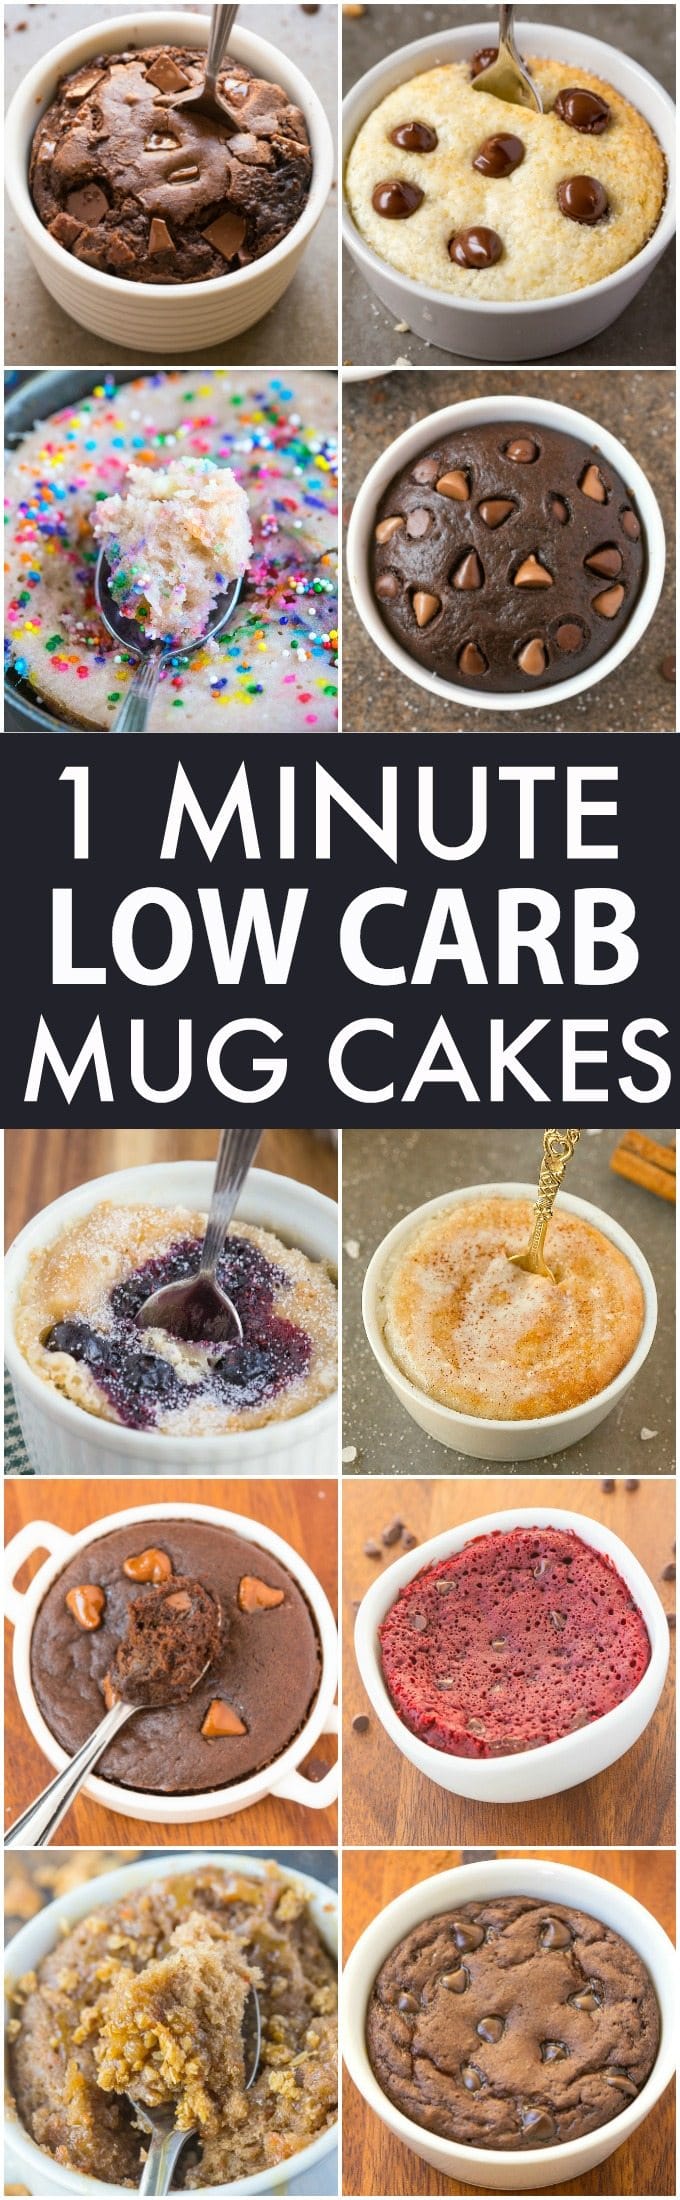 Low Carb Healthy 1 Minute Mug Cakes, Brownies and Muffins (V, GF, Paleo)- Delicious, single-serve desserts and snacks which take less than a minute! Low carb, sugar free and more with OVEN options too! {vegan, gluten free, paleo recipe}- #mugcake #healthy #singleserve | recipe on thebigmansworld.com